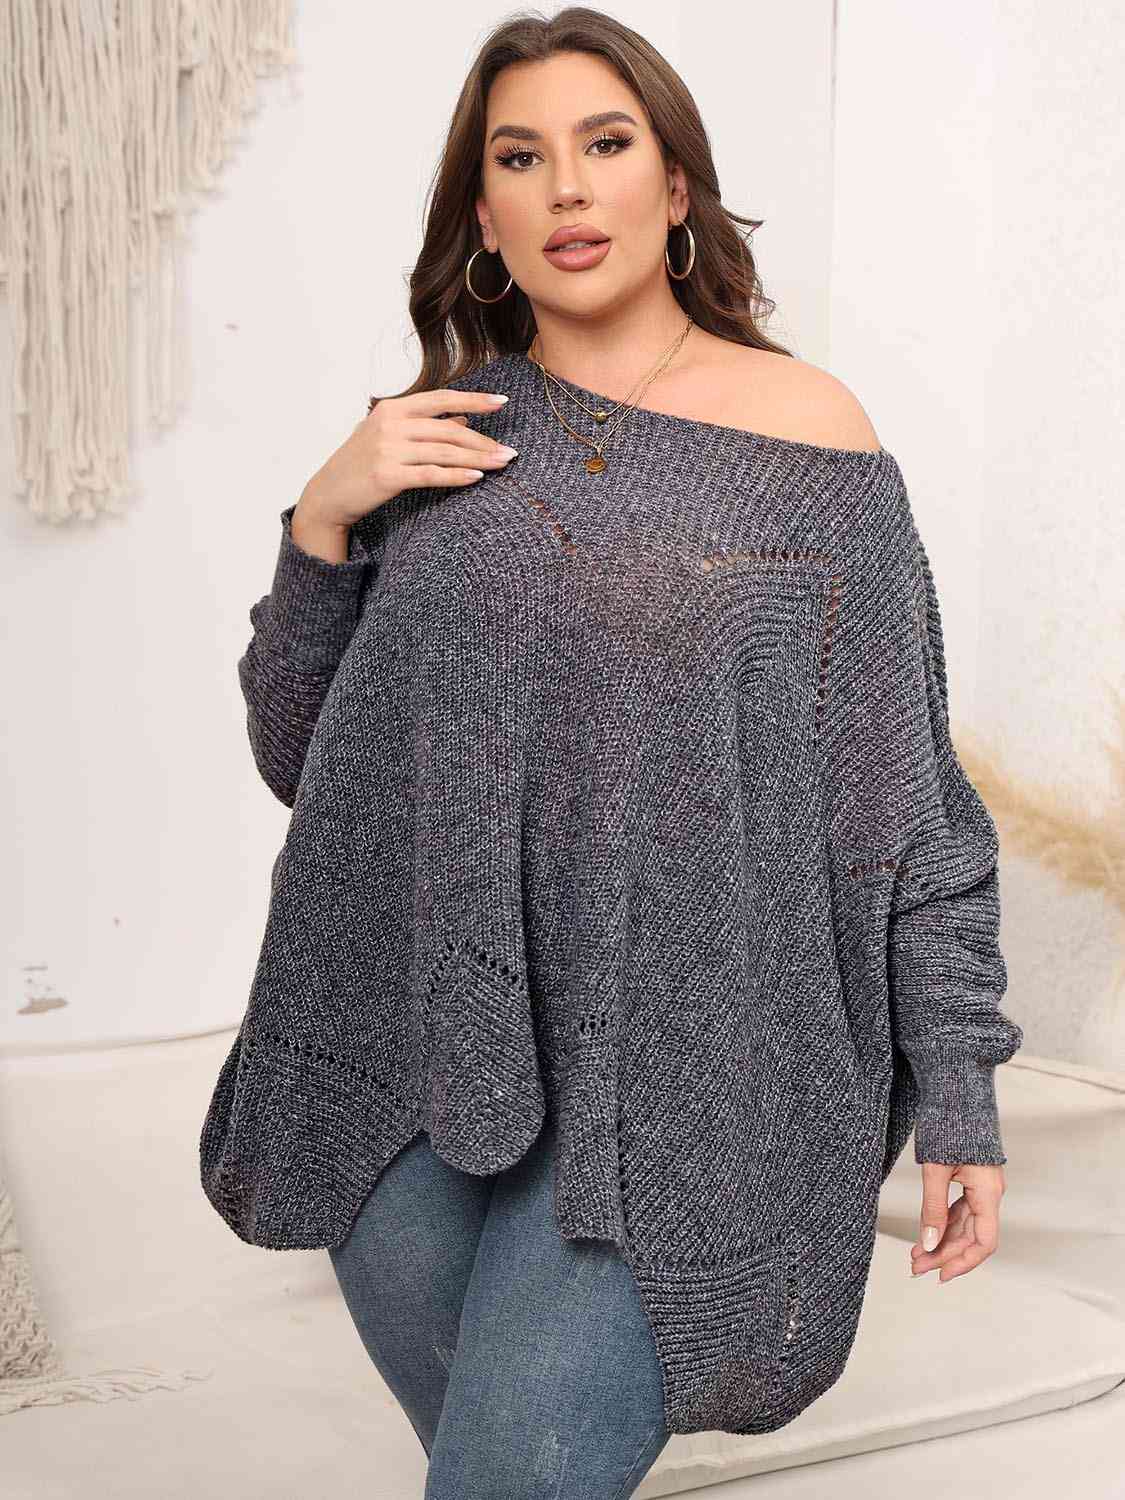 Plus Size Batwing Sleeve Sweater